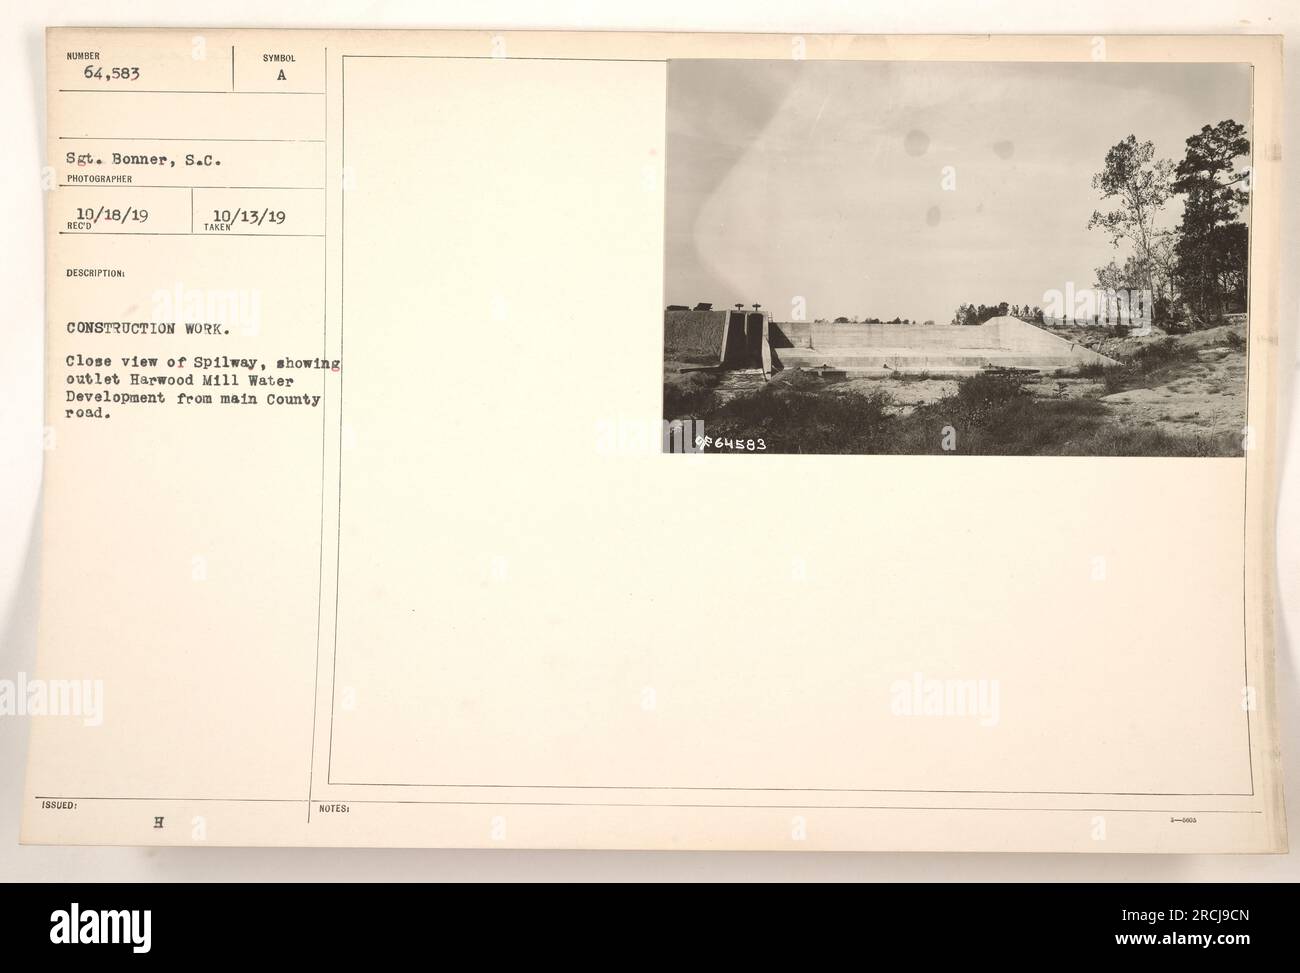 Construction work taking place at Harwood Mill Water Development, as captured by Sgt. Bonner on 10/18/19. The photograph shows a close view of a spillway, with the outlet visible from the main County road. The notes mention the assigned number for the image as 64583 and indicate that it was part of a collection related to construction work. Stock Photo